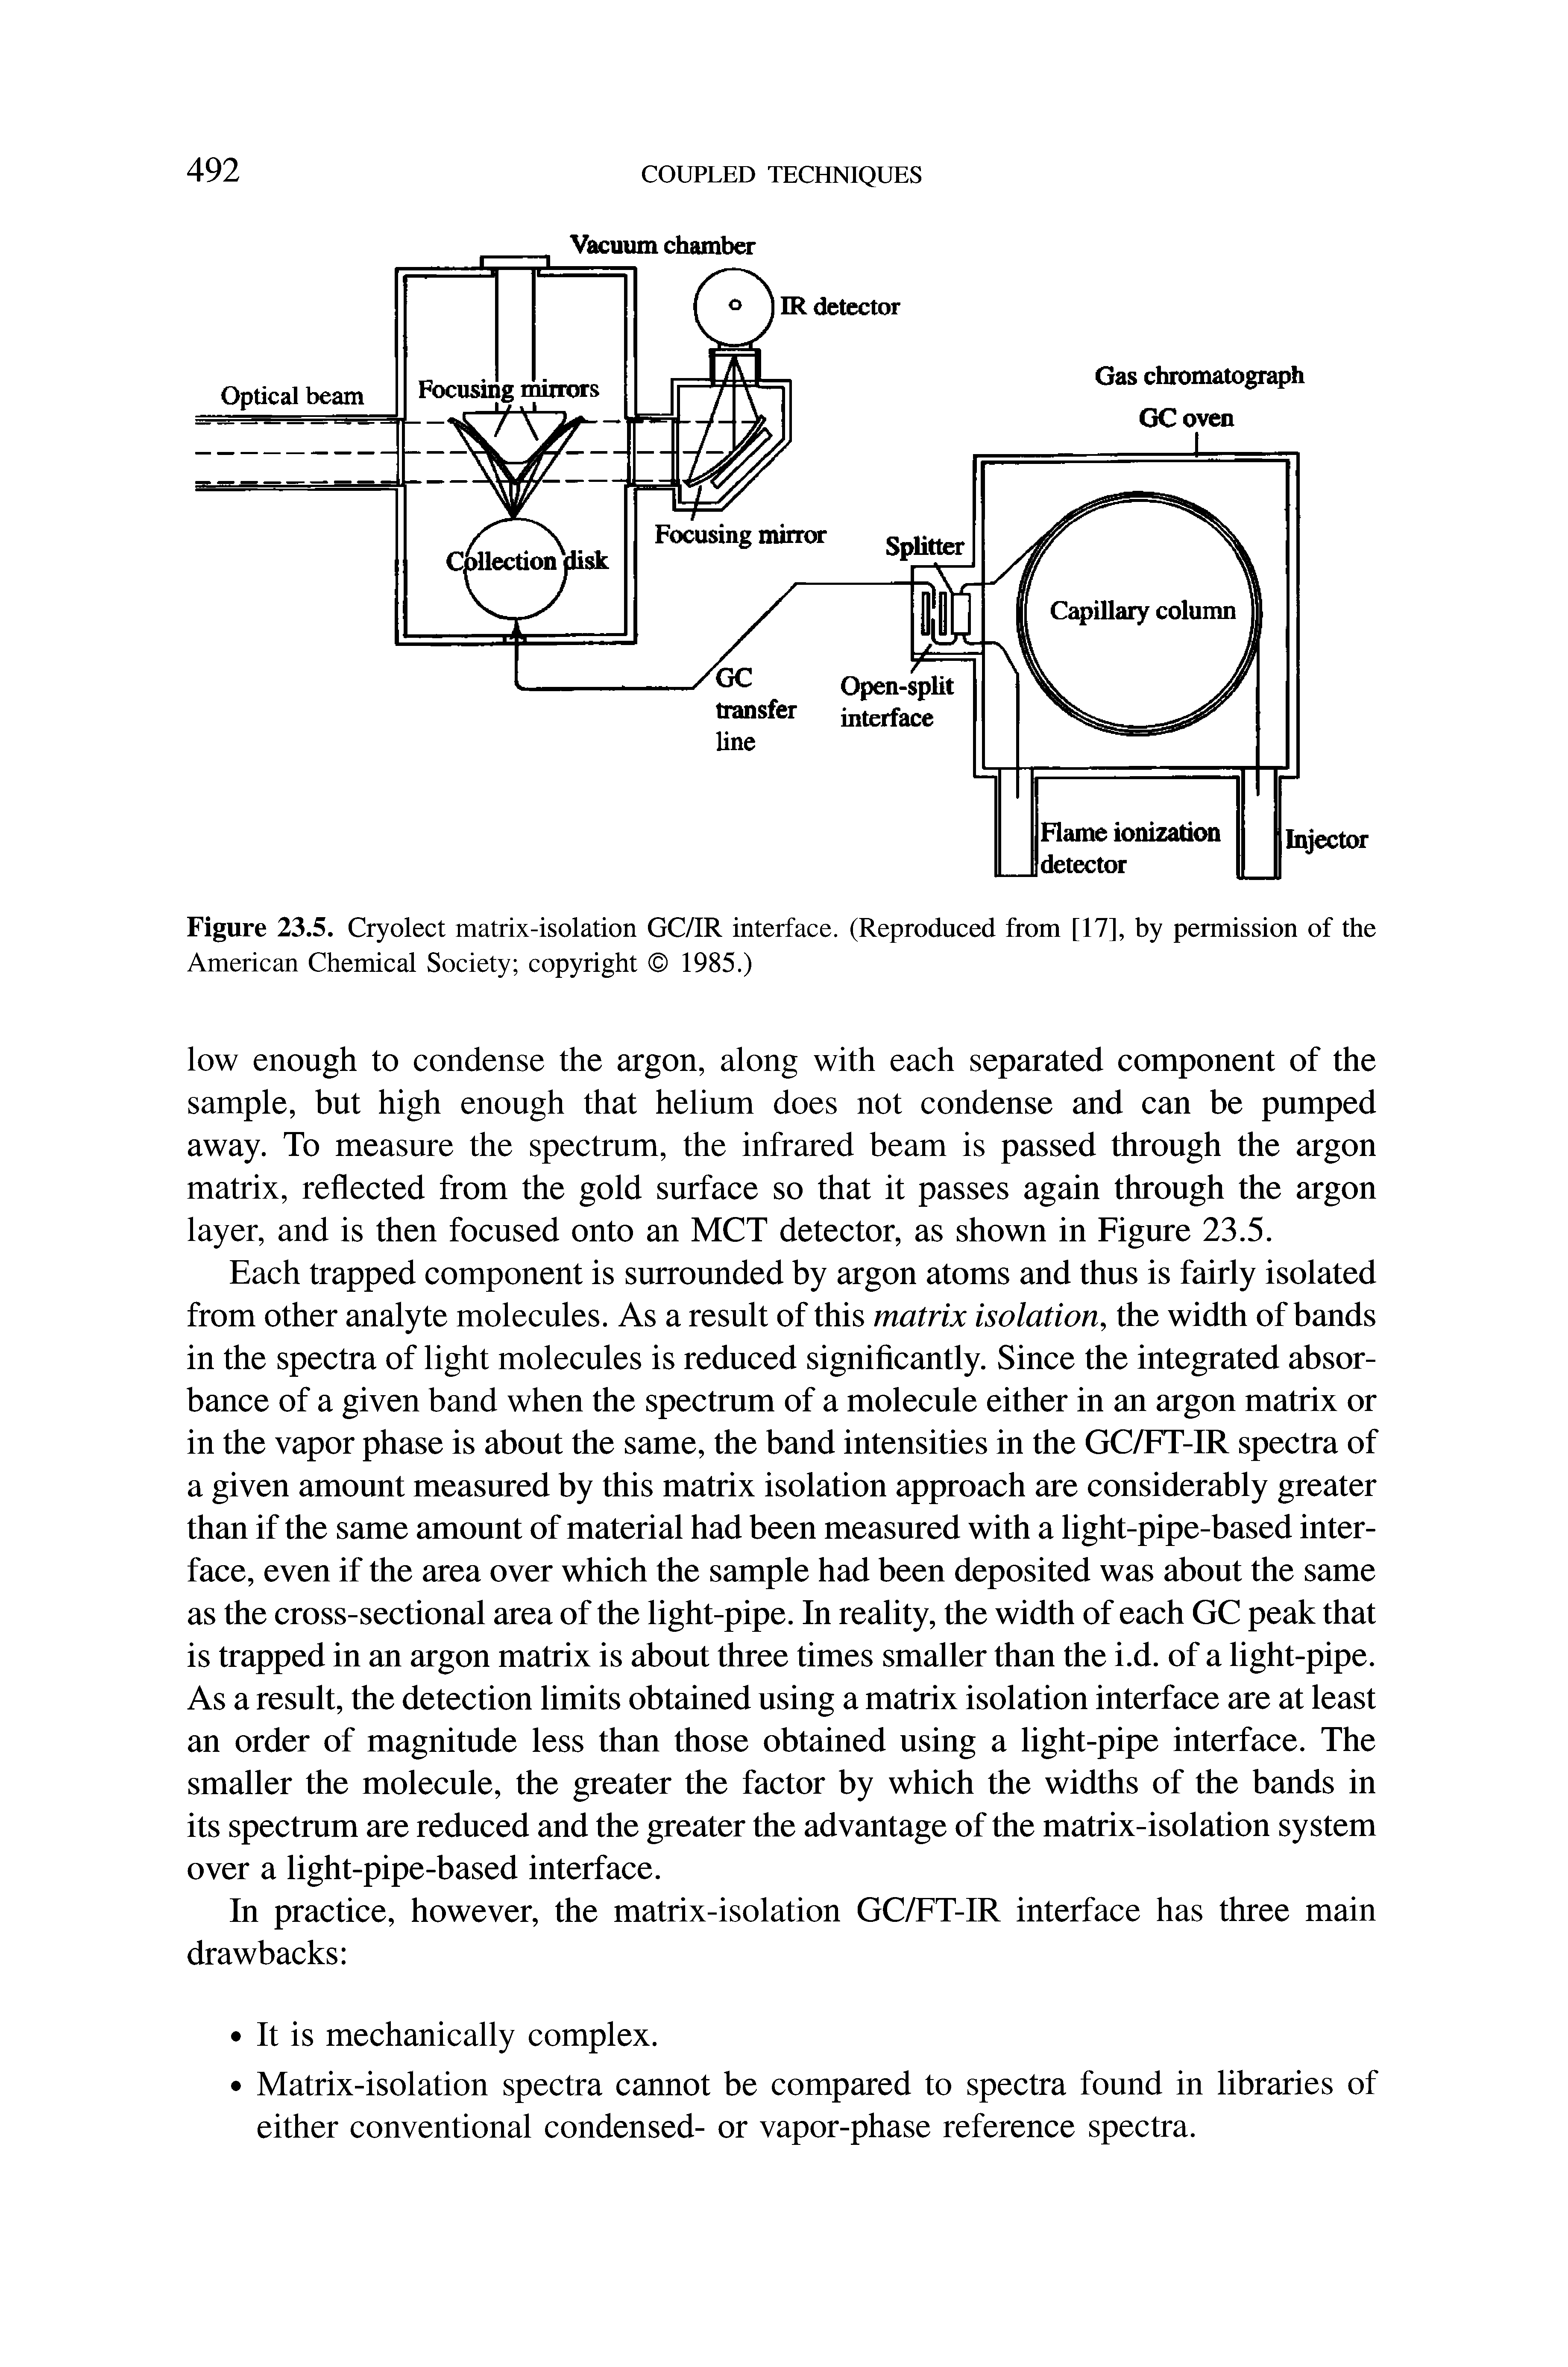 Figure 23.5. Cryolect matrix-isolation GC/IR interface. (Reproduced from [17], by permission of the American Chemical Society copyright 1985.)...